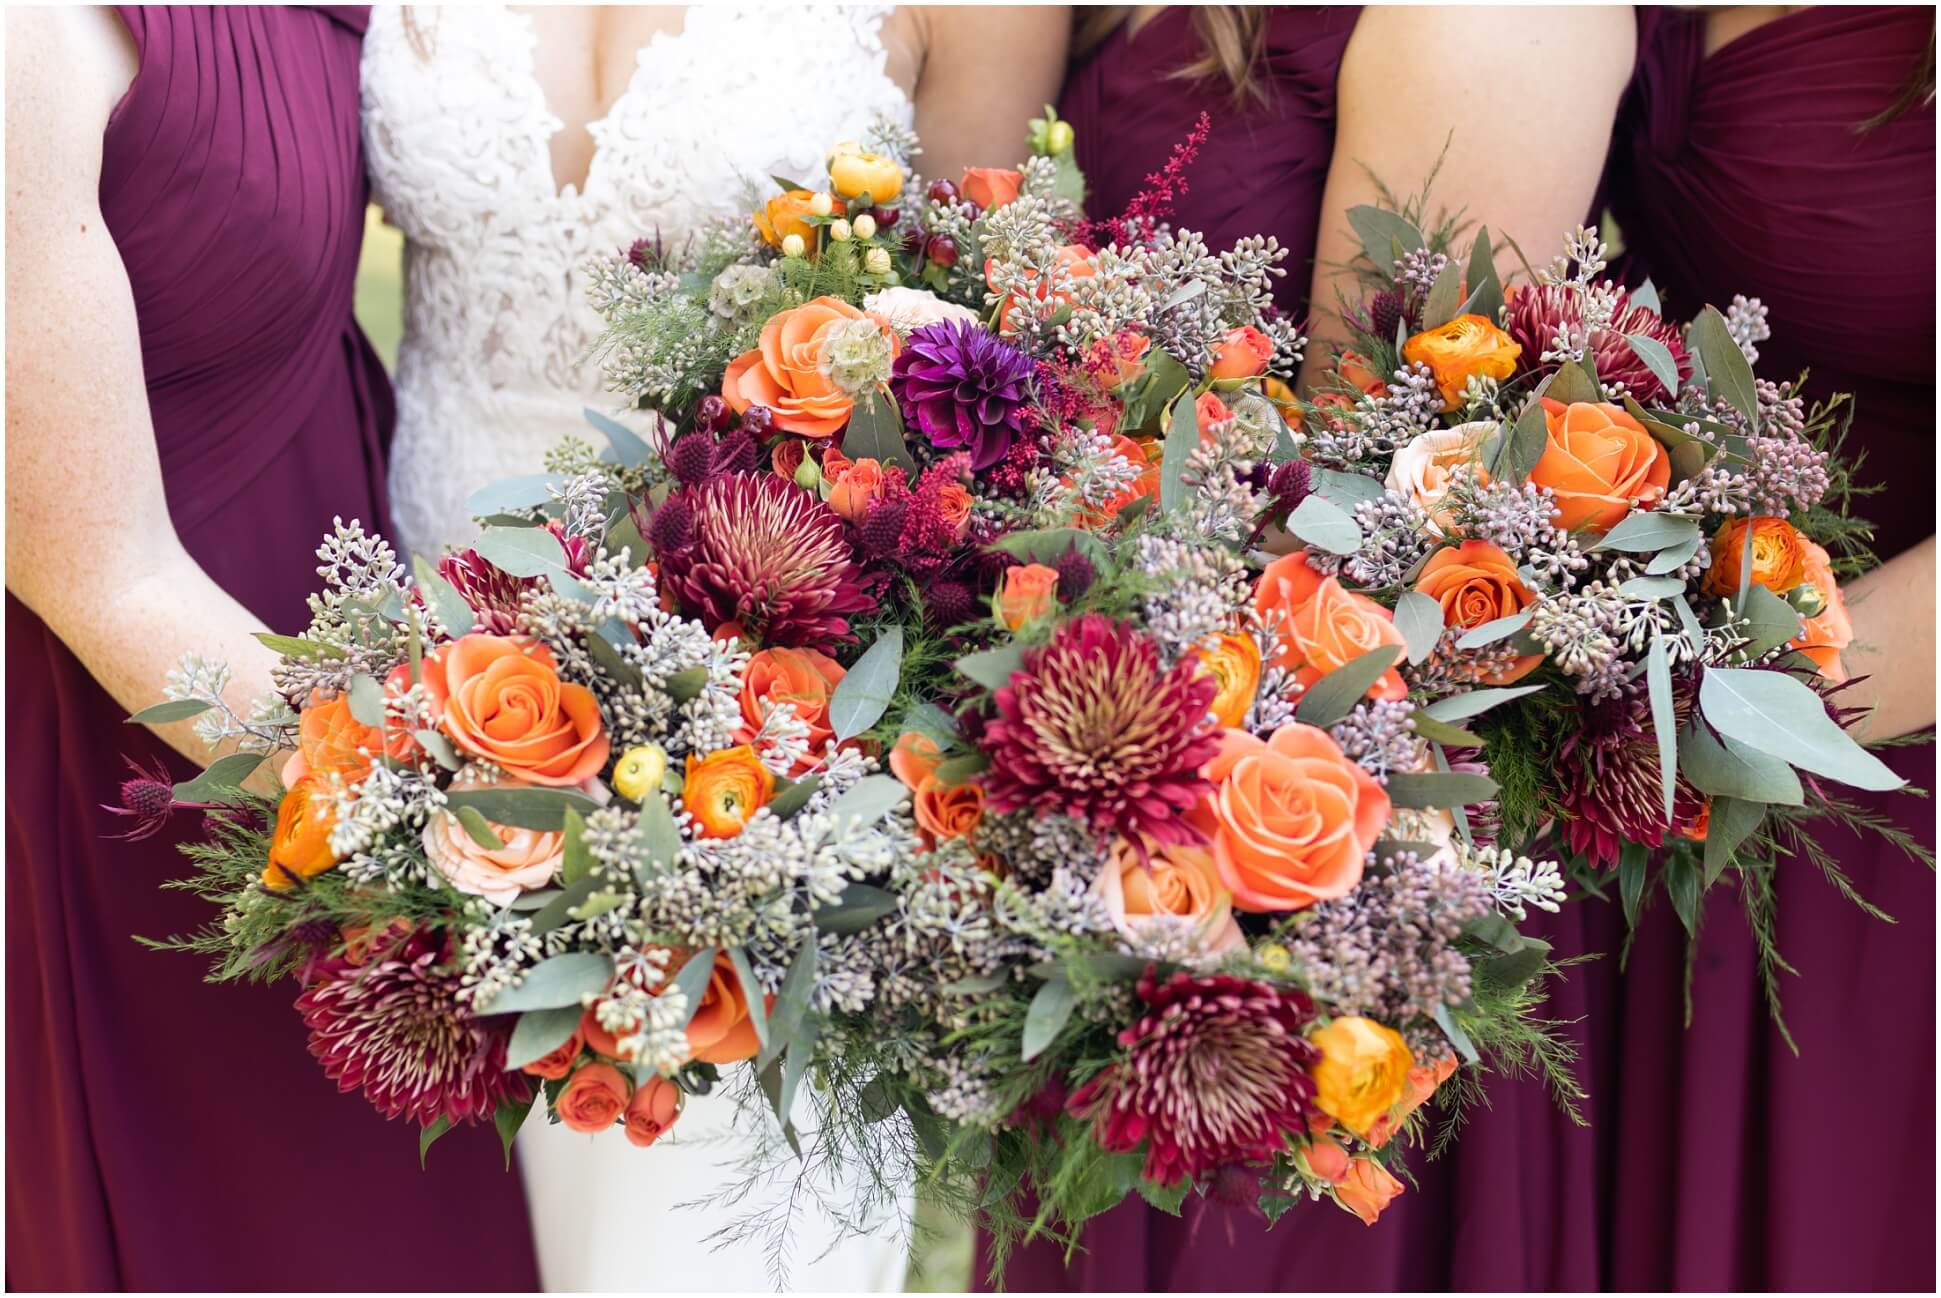 BURGUNDY AND ORANGE FLOWERS IN BOUQUETS WITH EUCALYPTUS GREENS